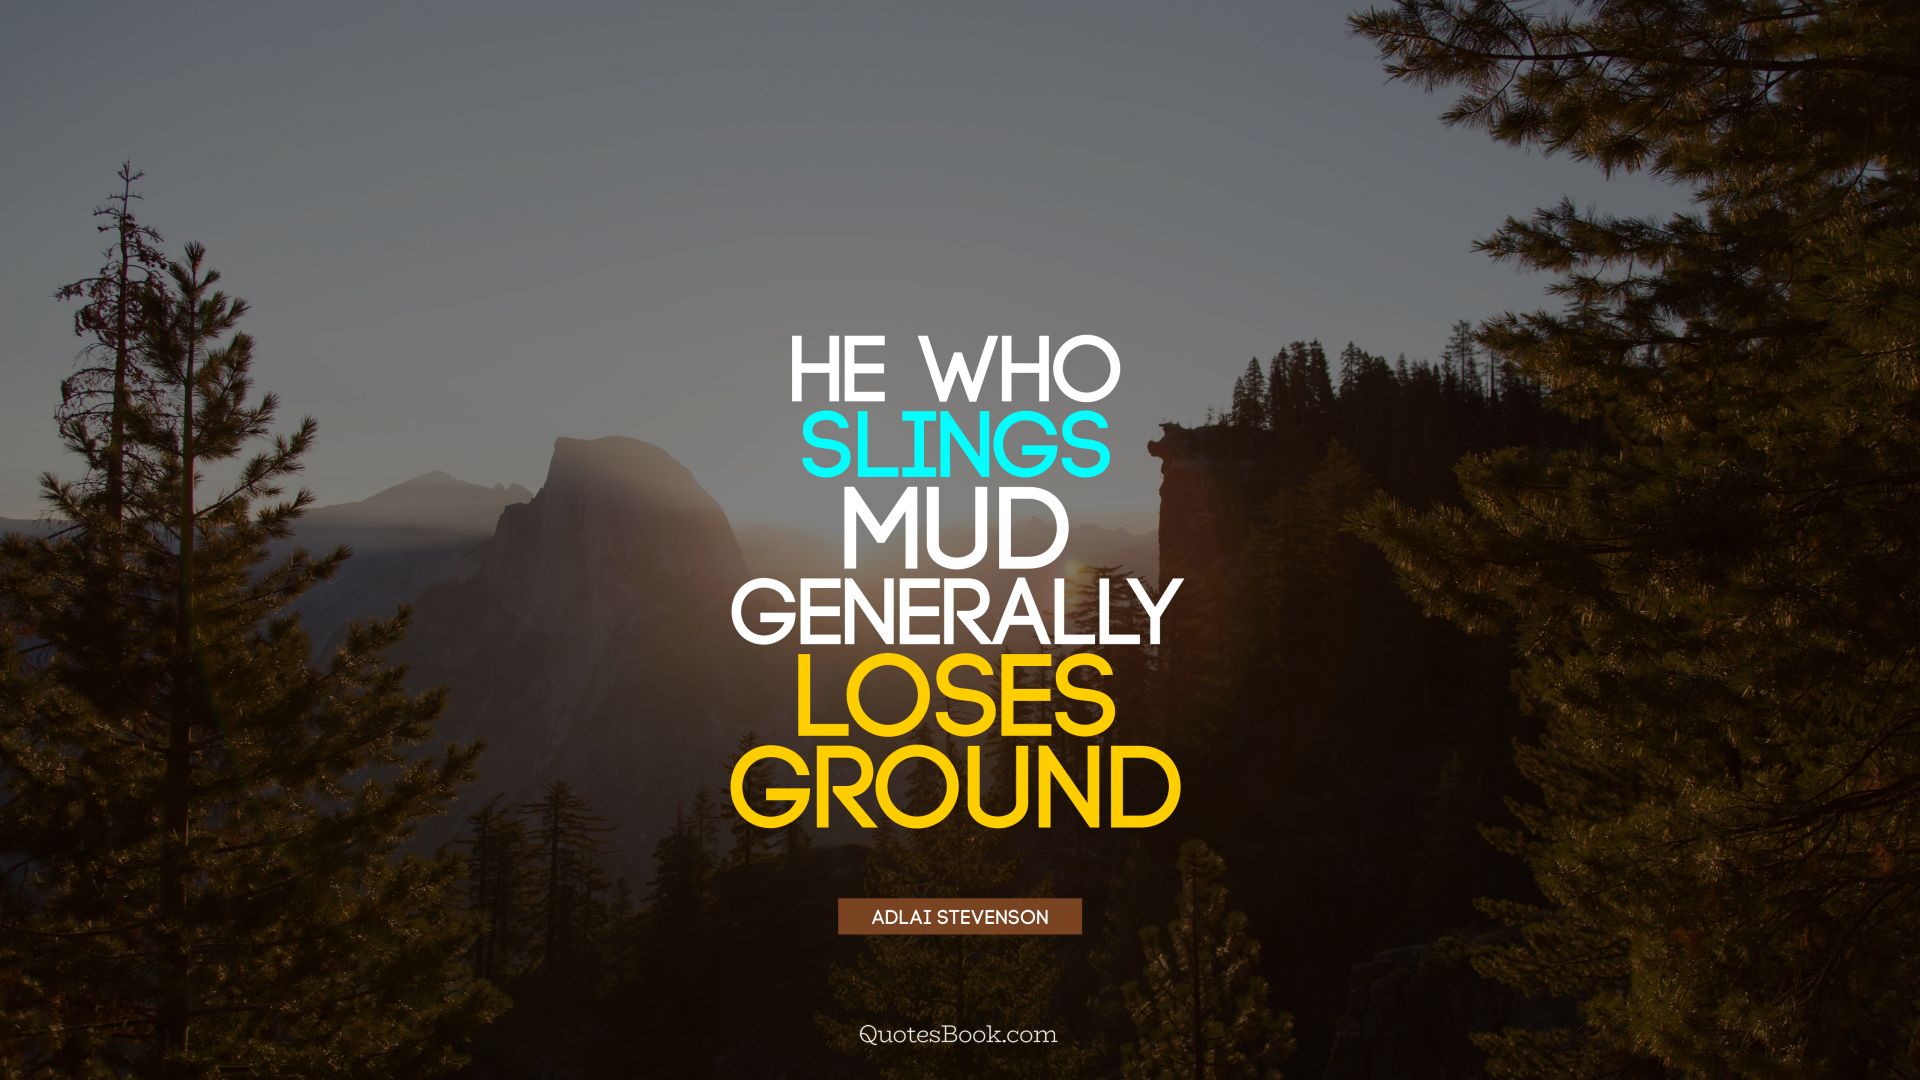 He who slings mud generally loses ground. - Quote by Adlai Stevenson